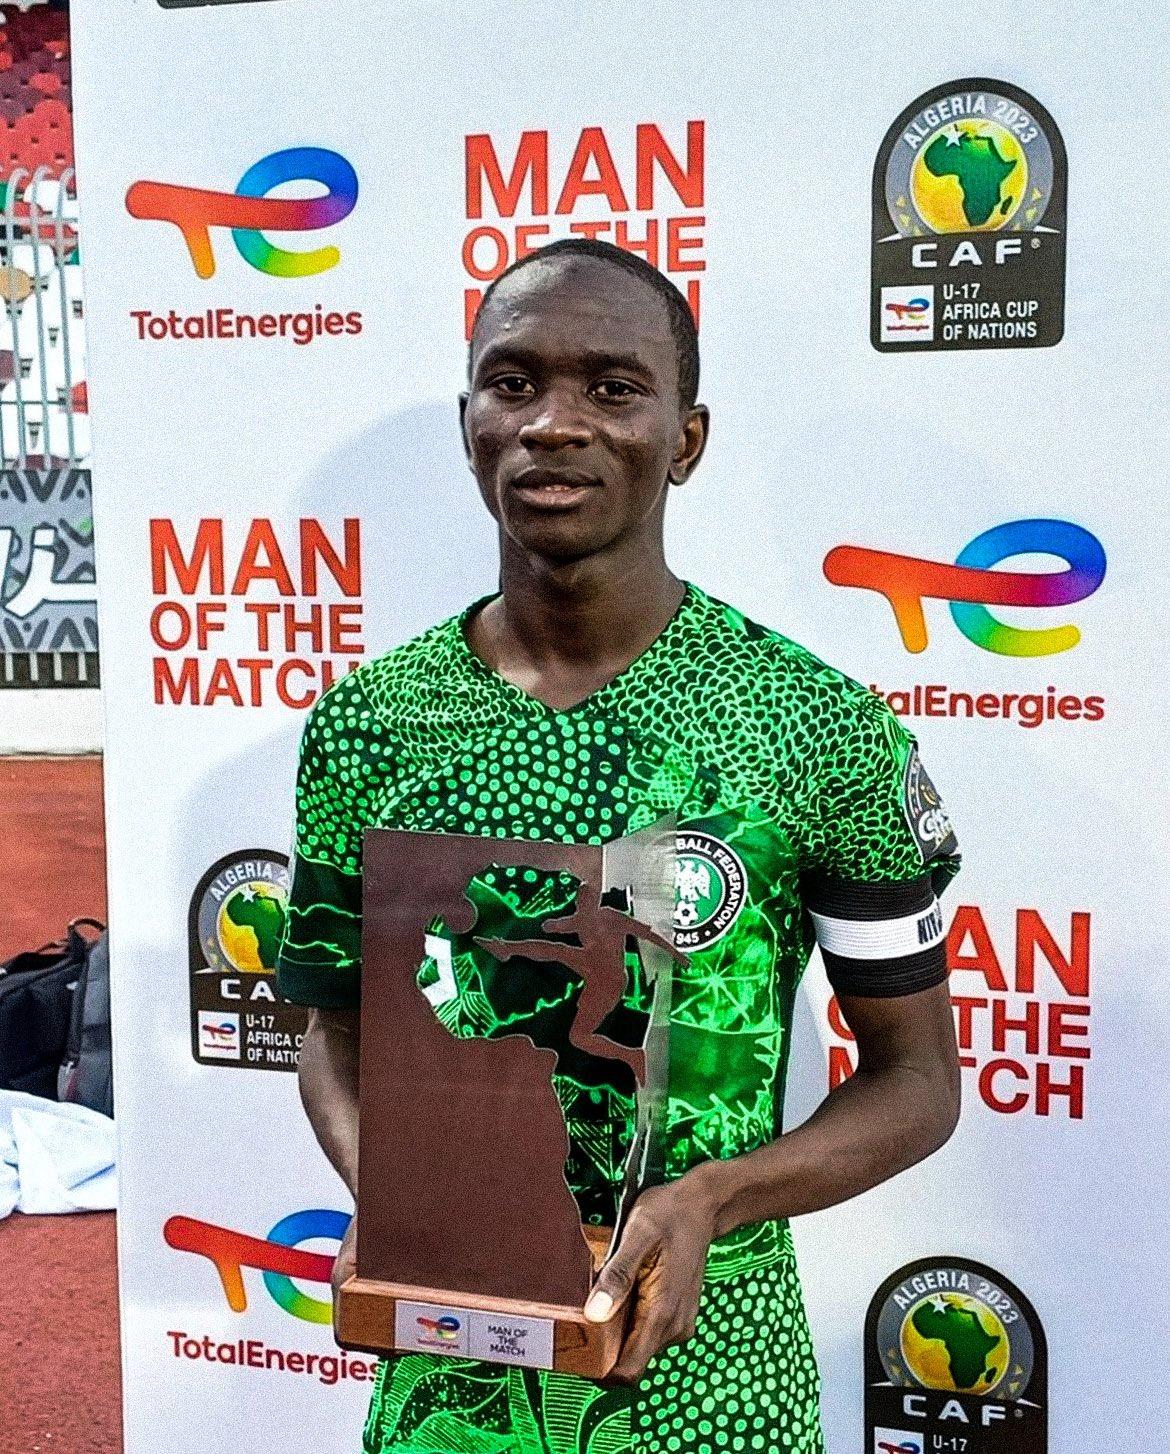 U17 AFCON: Glorious Lawali named greatest participant once more regardless of Nigeria’s slim loss to Morocco